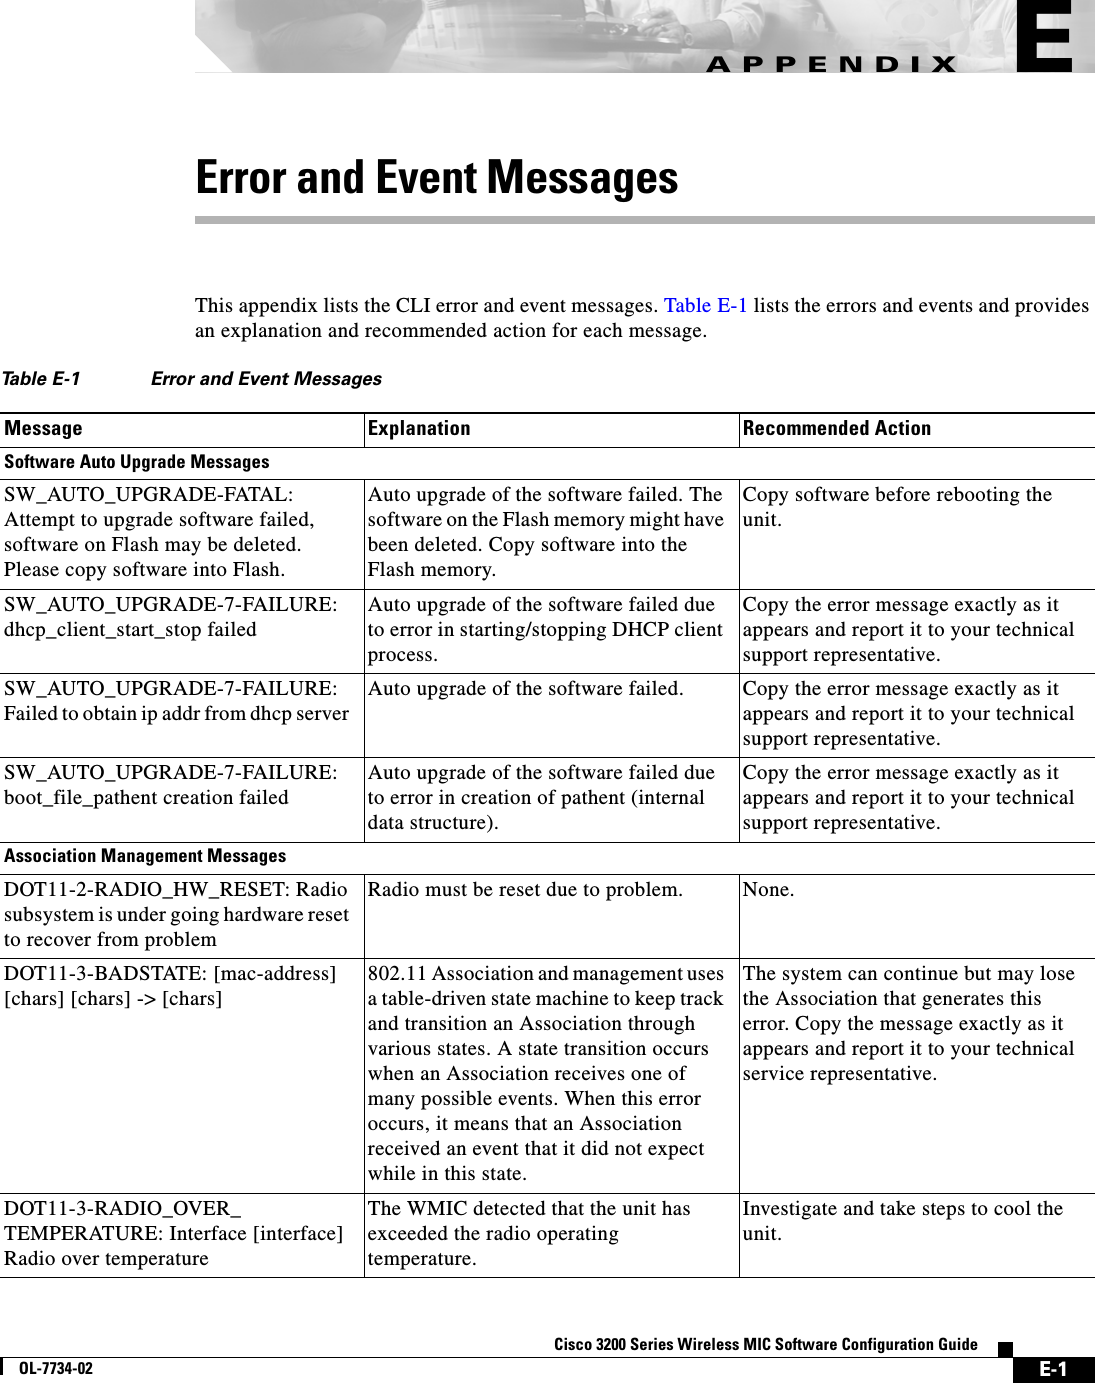 E-1Cisco 3200 Series Wireless MIC Software Configuration GuideOL-7734-02APPENDIXEError and Event MessagesThis appendix lists the CLI error and event messages. Table E-1 lists the errors and events and provides an explanation and recommended action for each message.Table E-1 Error and Event MessagesMessage Explanation Recommended ActionSoftware Auto Upgrade MessagesSW_AUTO_UPGRADE-FATAL: Attempt to upgrade software failed, software on Flash may be deleted. Please copy software into Flash. Auto upgrade of the software failed. The software on the Flash memory might have been deleted. Copy software into the Flash memory. Copy software before rebooting the unit. SW_AUTO_UPGRADE-7-FAILURE: dhcp_client_start_stop failed Auto upgrade of the software failed due to error in starting/stopping DHCP client process.Copy the error message exactly as it appears and report it to your technical support representative. SW_AUTO_UPGRADE-7-FAILURE: Failed to obtain ip addr from dhcp server Auto upgrade of the software failed. Copy the error message exactly as it appears and report it to your technical support representative.SW_AUTO_UPGRADE-7-FAILURE: boot_file_pathent creation failed Auto upgrade of the software failed due to error in creation of pathent (internal data structure).Copy the error message exactly as it appears and report it to your technical support representative.Association Management MessagesDOT11-2-RADIO_HW_RESET: Radio subsystem is under going hardware reset to recover from problemRadio must be reset due to problem. None.DOT11-3-BADSTATE: [mac-address] [chars] [chars] -&gt; [chars]802.11 Association and management uses a table-driven state machine to keep track and transition an Association through various states. A state transition occurs when an Association receives one of many possible events. When this error occurs, it means that an Association received an event that it did not expect while in this state.The system can continue but may lose the Association that generates this error. Copy the message exactly as it appears and report it to your technical service representative.DOT11-3-RADIO_OVER_TEMPERATURE: Interface [interface] Radio over temperatureThe WMIC detected that the unit has exceeded the radio operating temperature.Investigate and take steps to cool the unit.